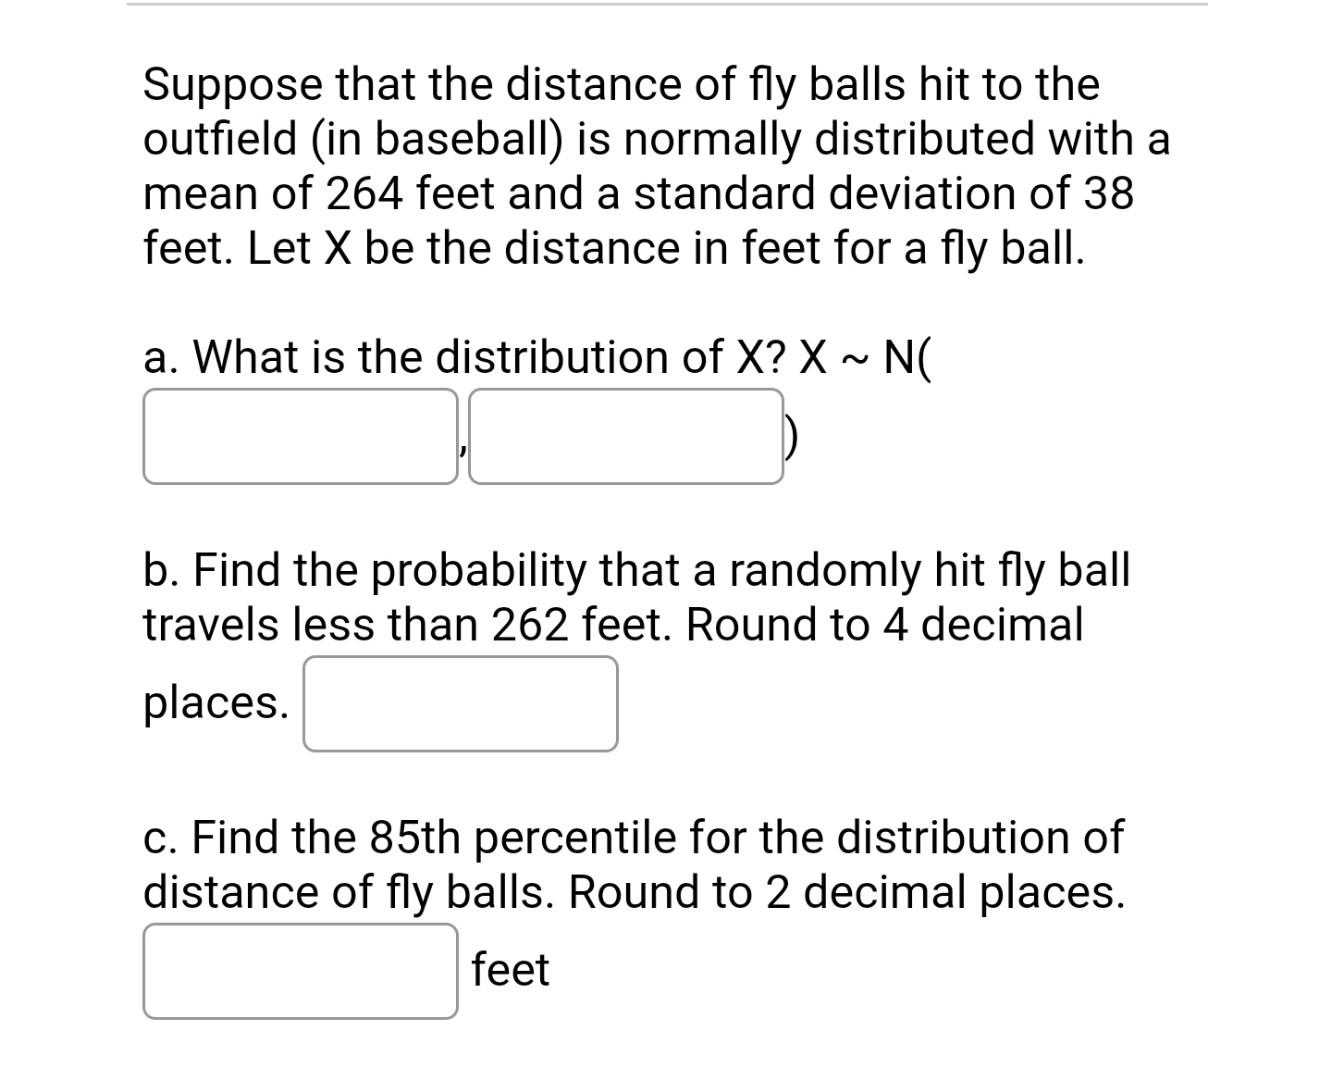 Suppose That The Distance Of Fly Balls Hit To The Outfield In Baseball Is Normally Distributed With A Mean Of 264 Feet 1